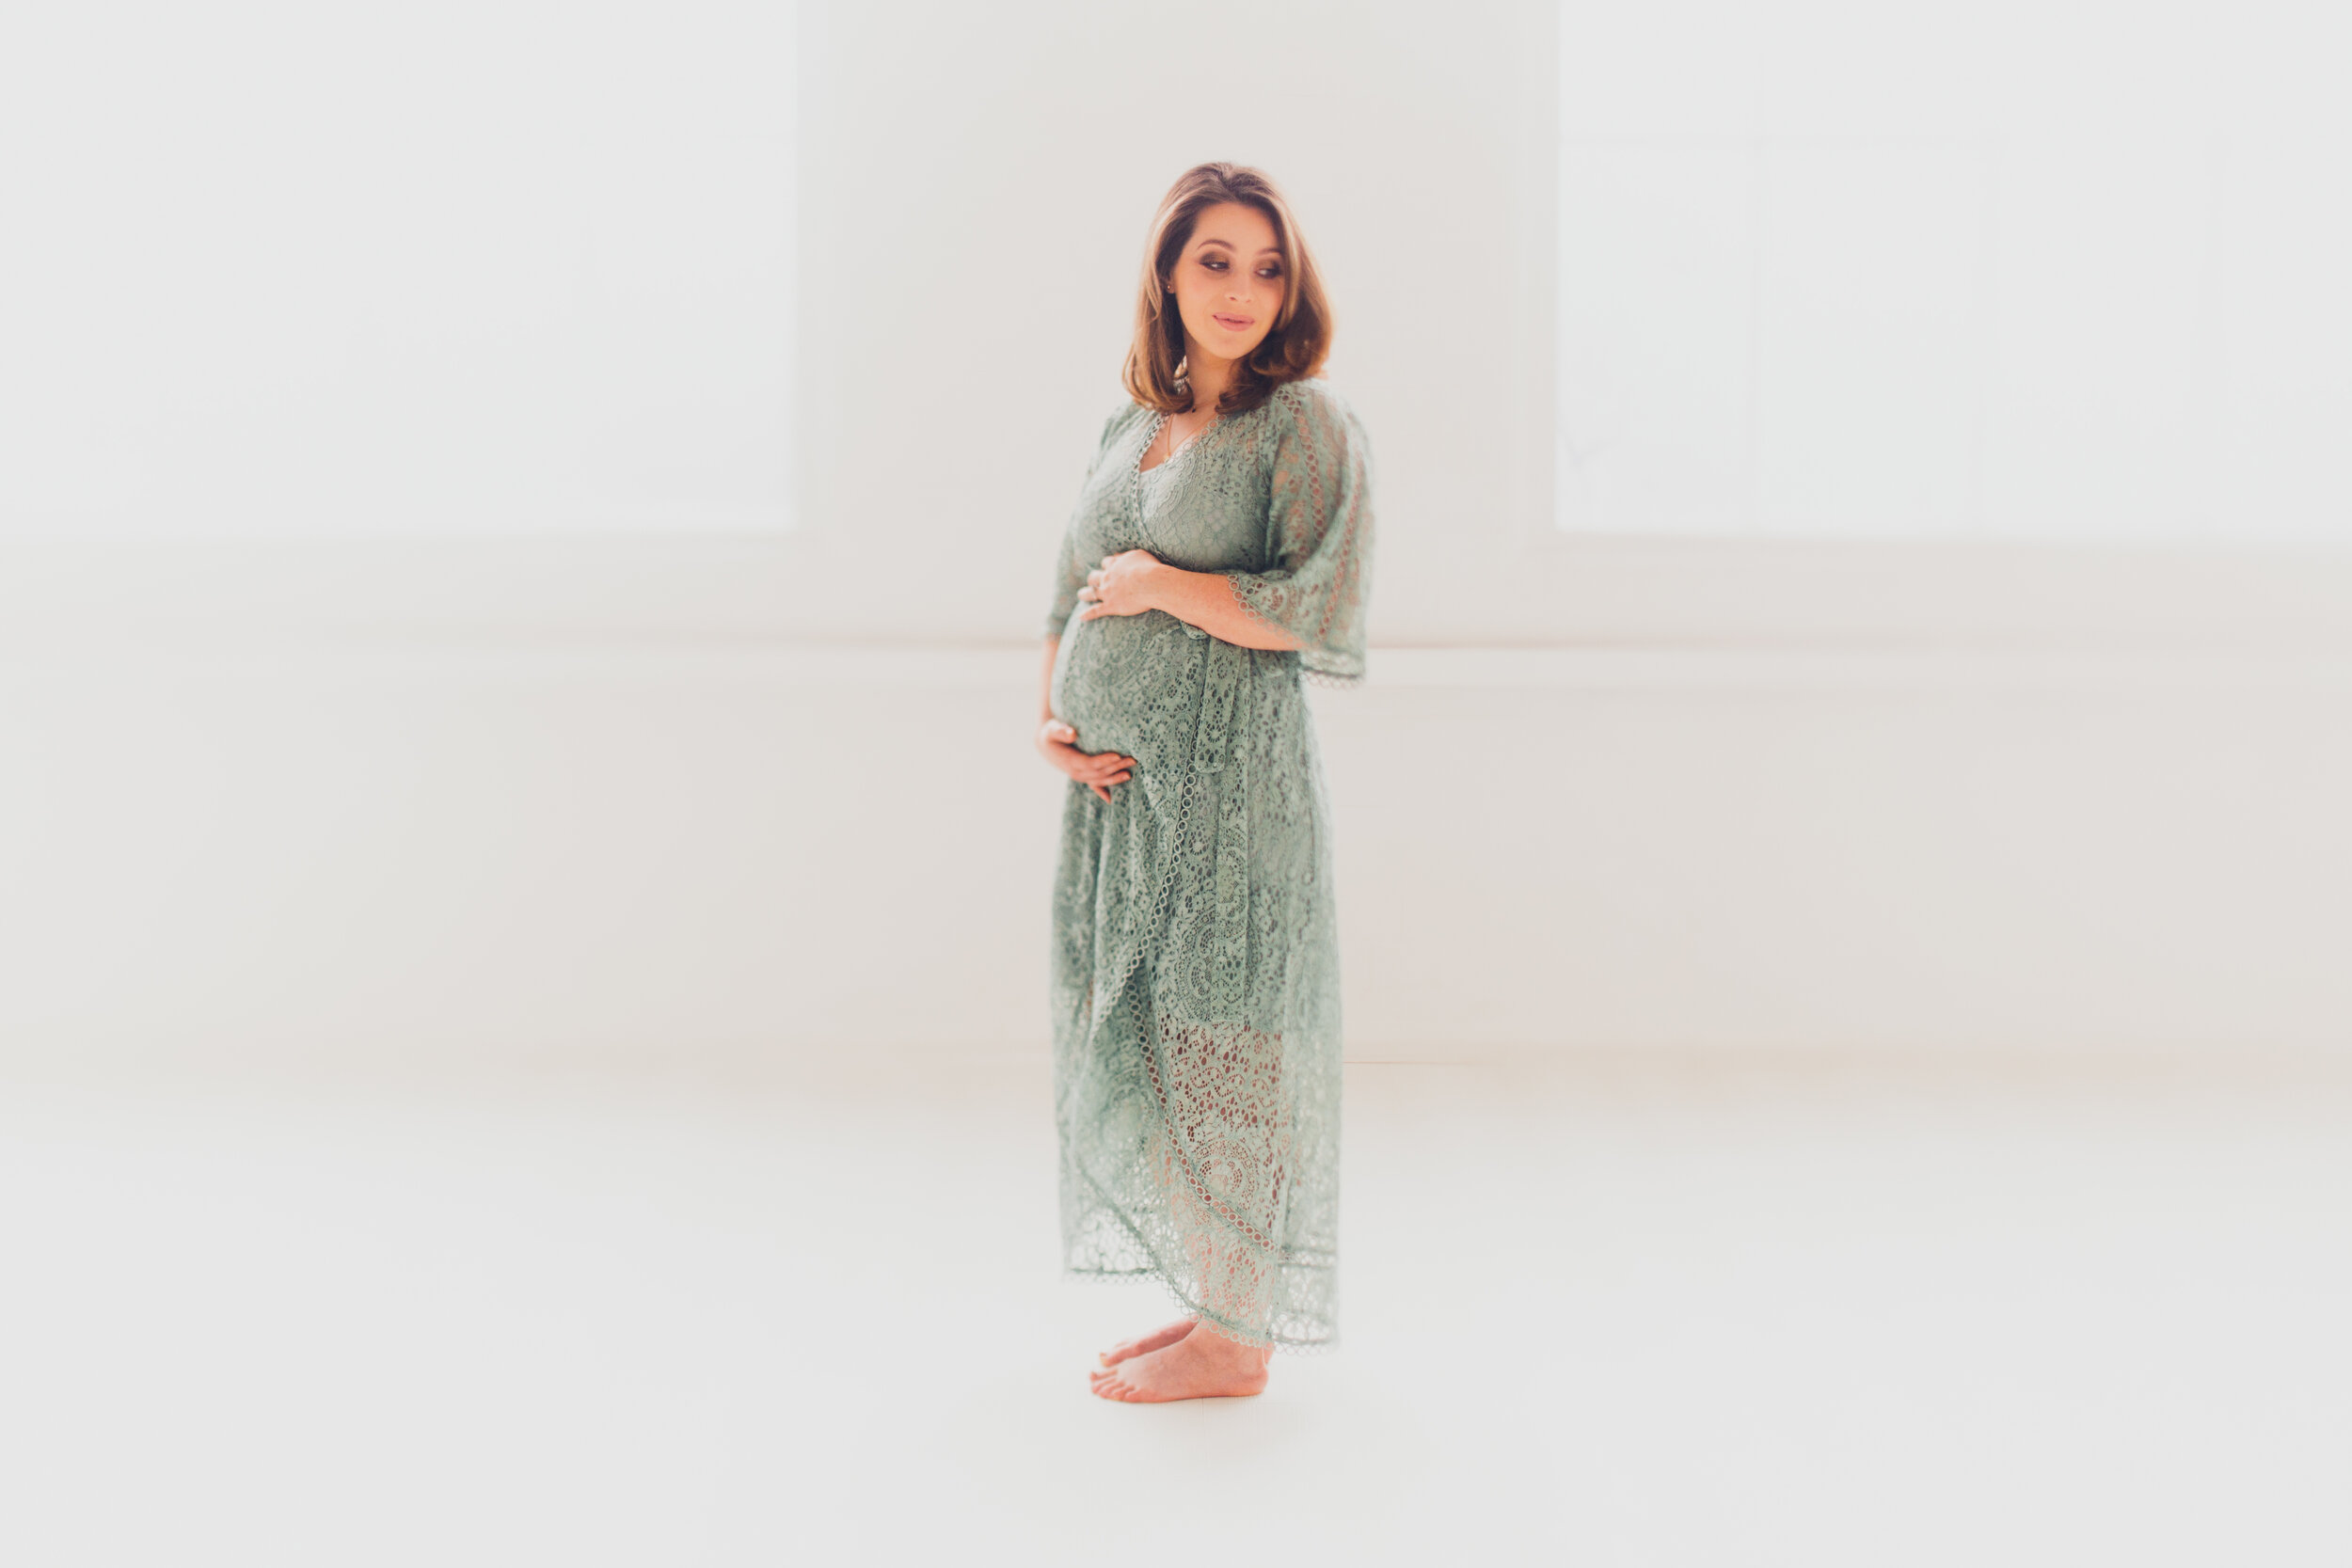 Pregnant woman standing in a soft white photography studio, cradling her baby bump